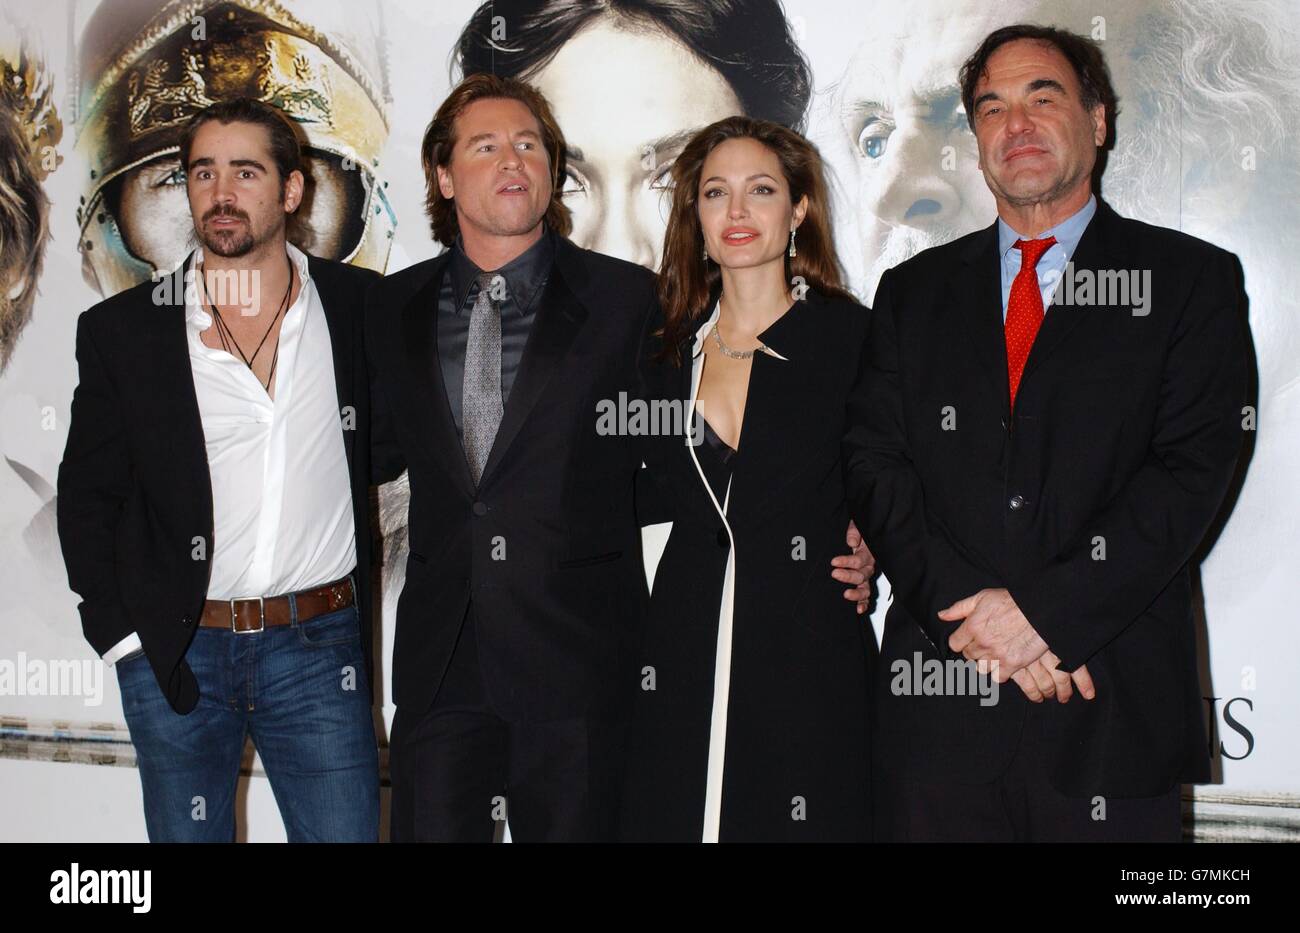 (From left to right) stars of the film Colin Farrell, Val Kilmer and Angelina Jolie with director Oliver Stone. Stock Photo